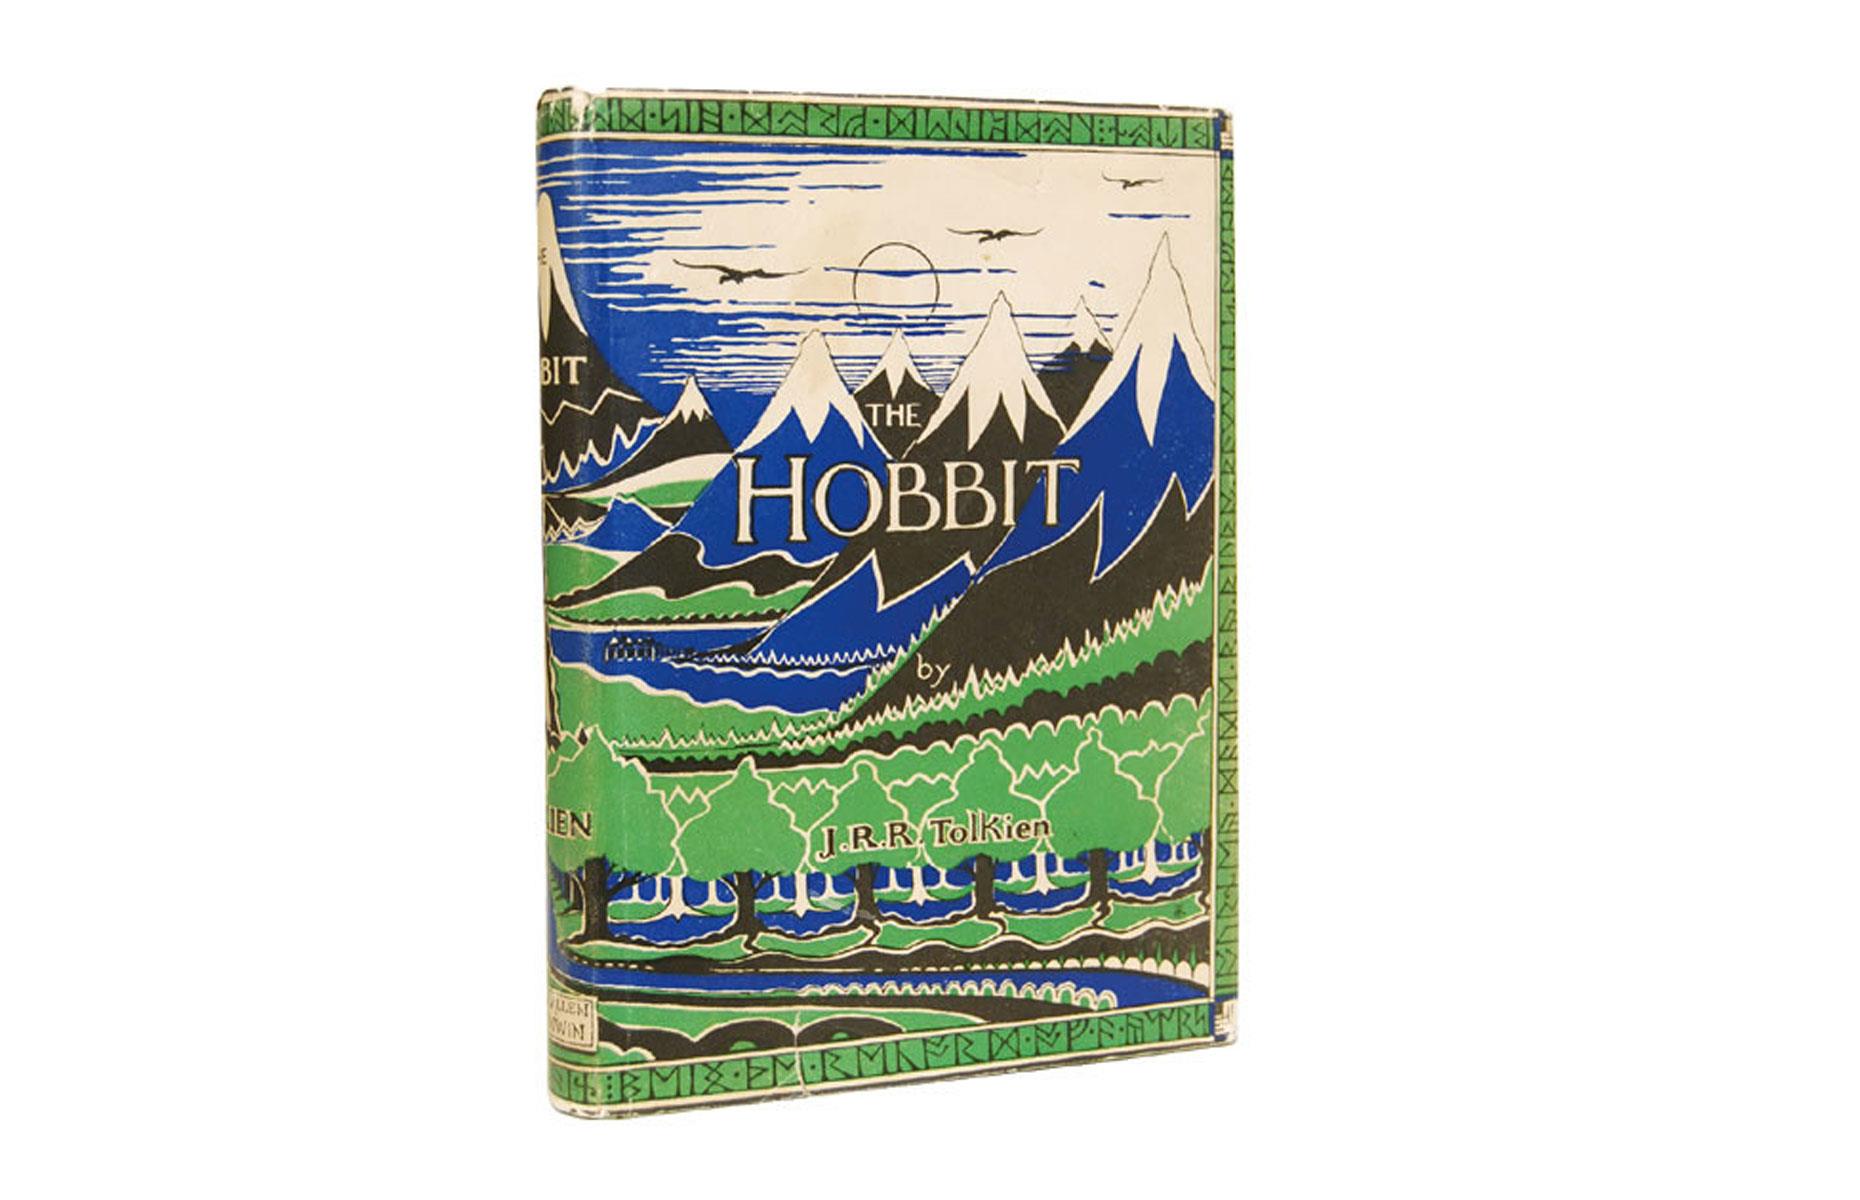 1946 – The Hobbit by JRR Tolkien First Edition, Fourth Impression: $6,000 (£4.4k)